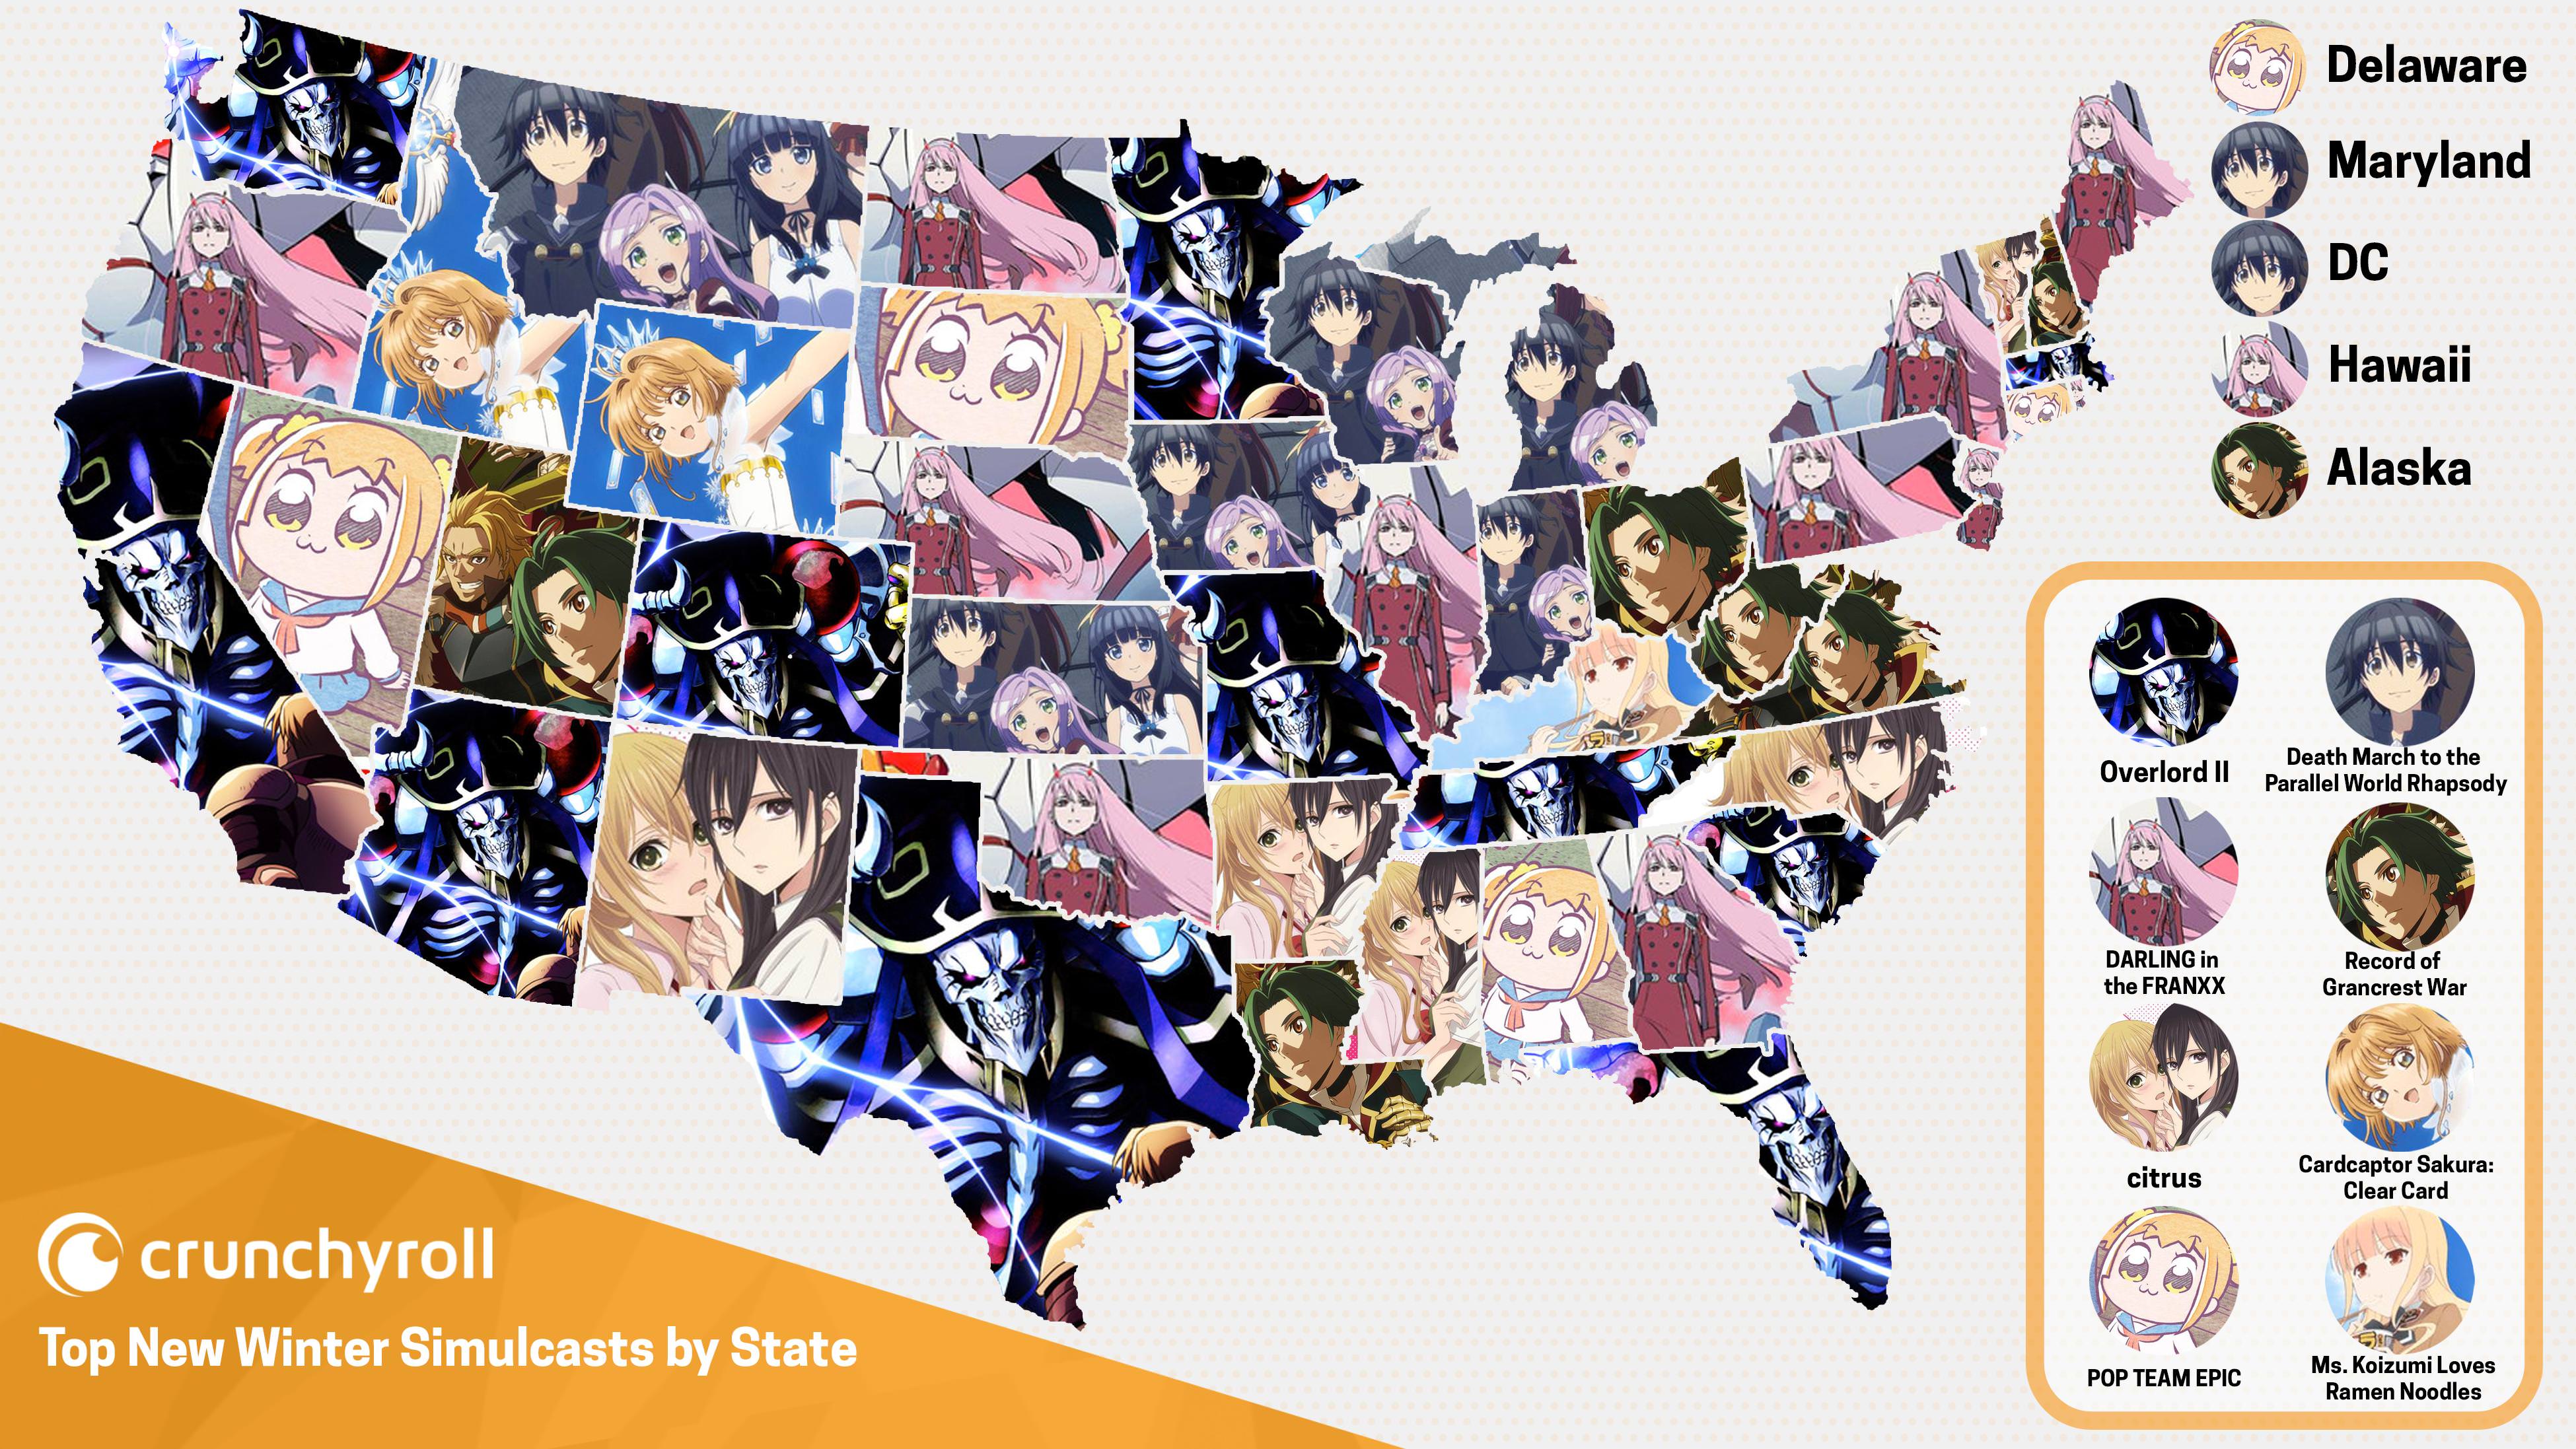 Update 18 02 10 Crunchyroll S Most Popular Winter Anime By State Us And Country Europe France Forums Myanimelist Net